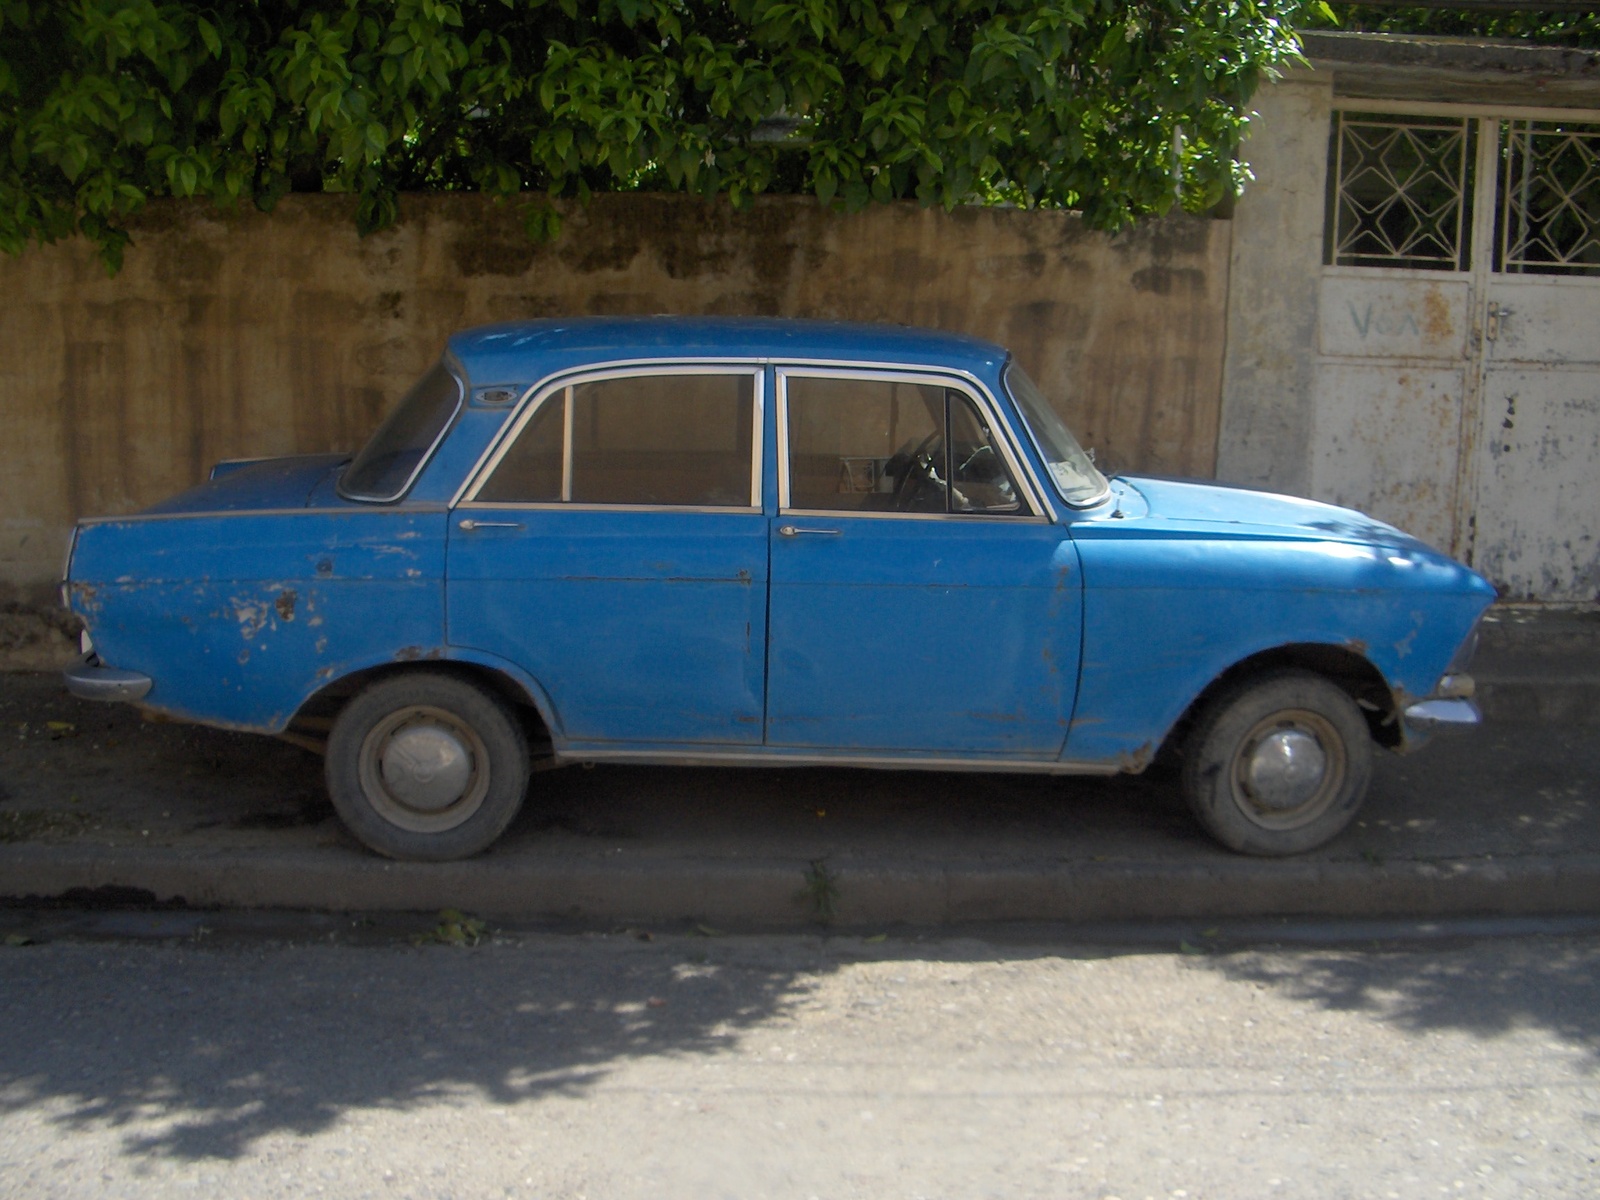 1955 Moskvitch 400/420 - Pictures - 1955 Moskvitch 400/420 picture ...